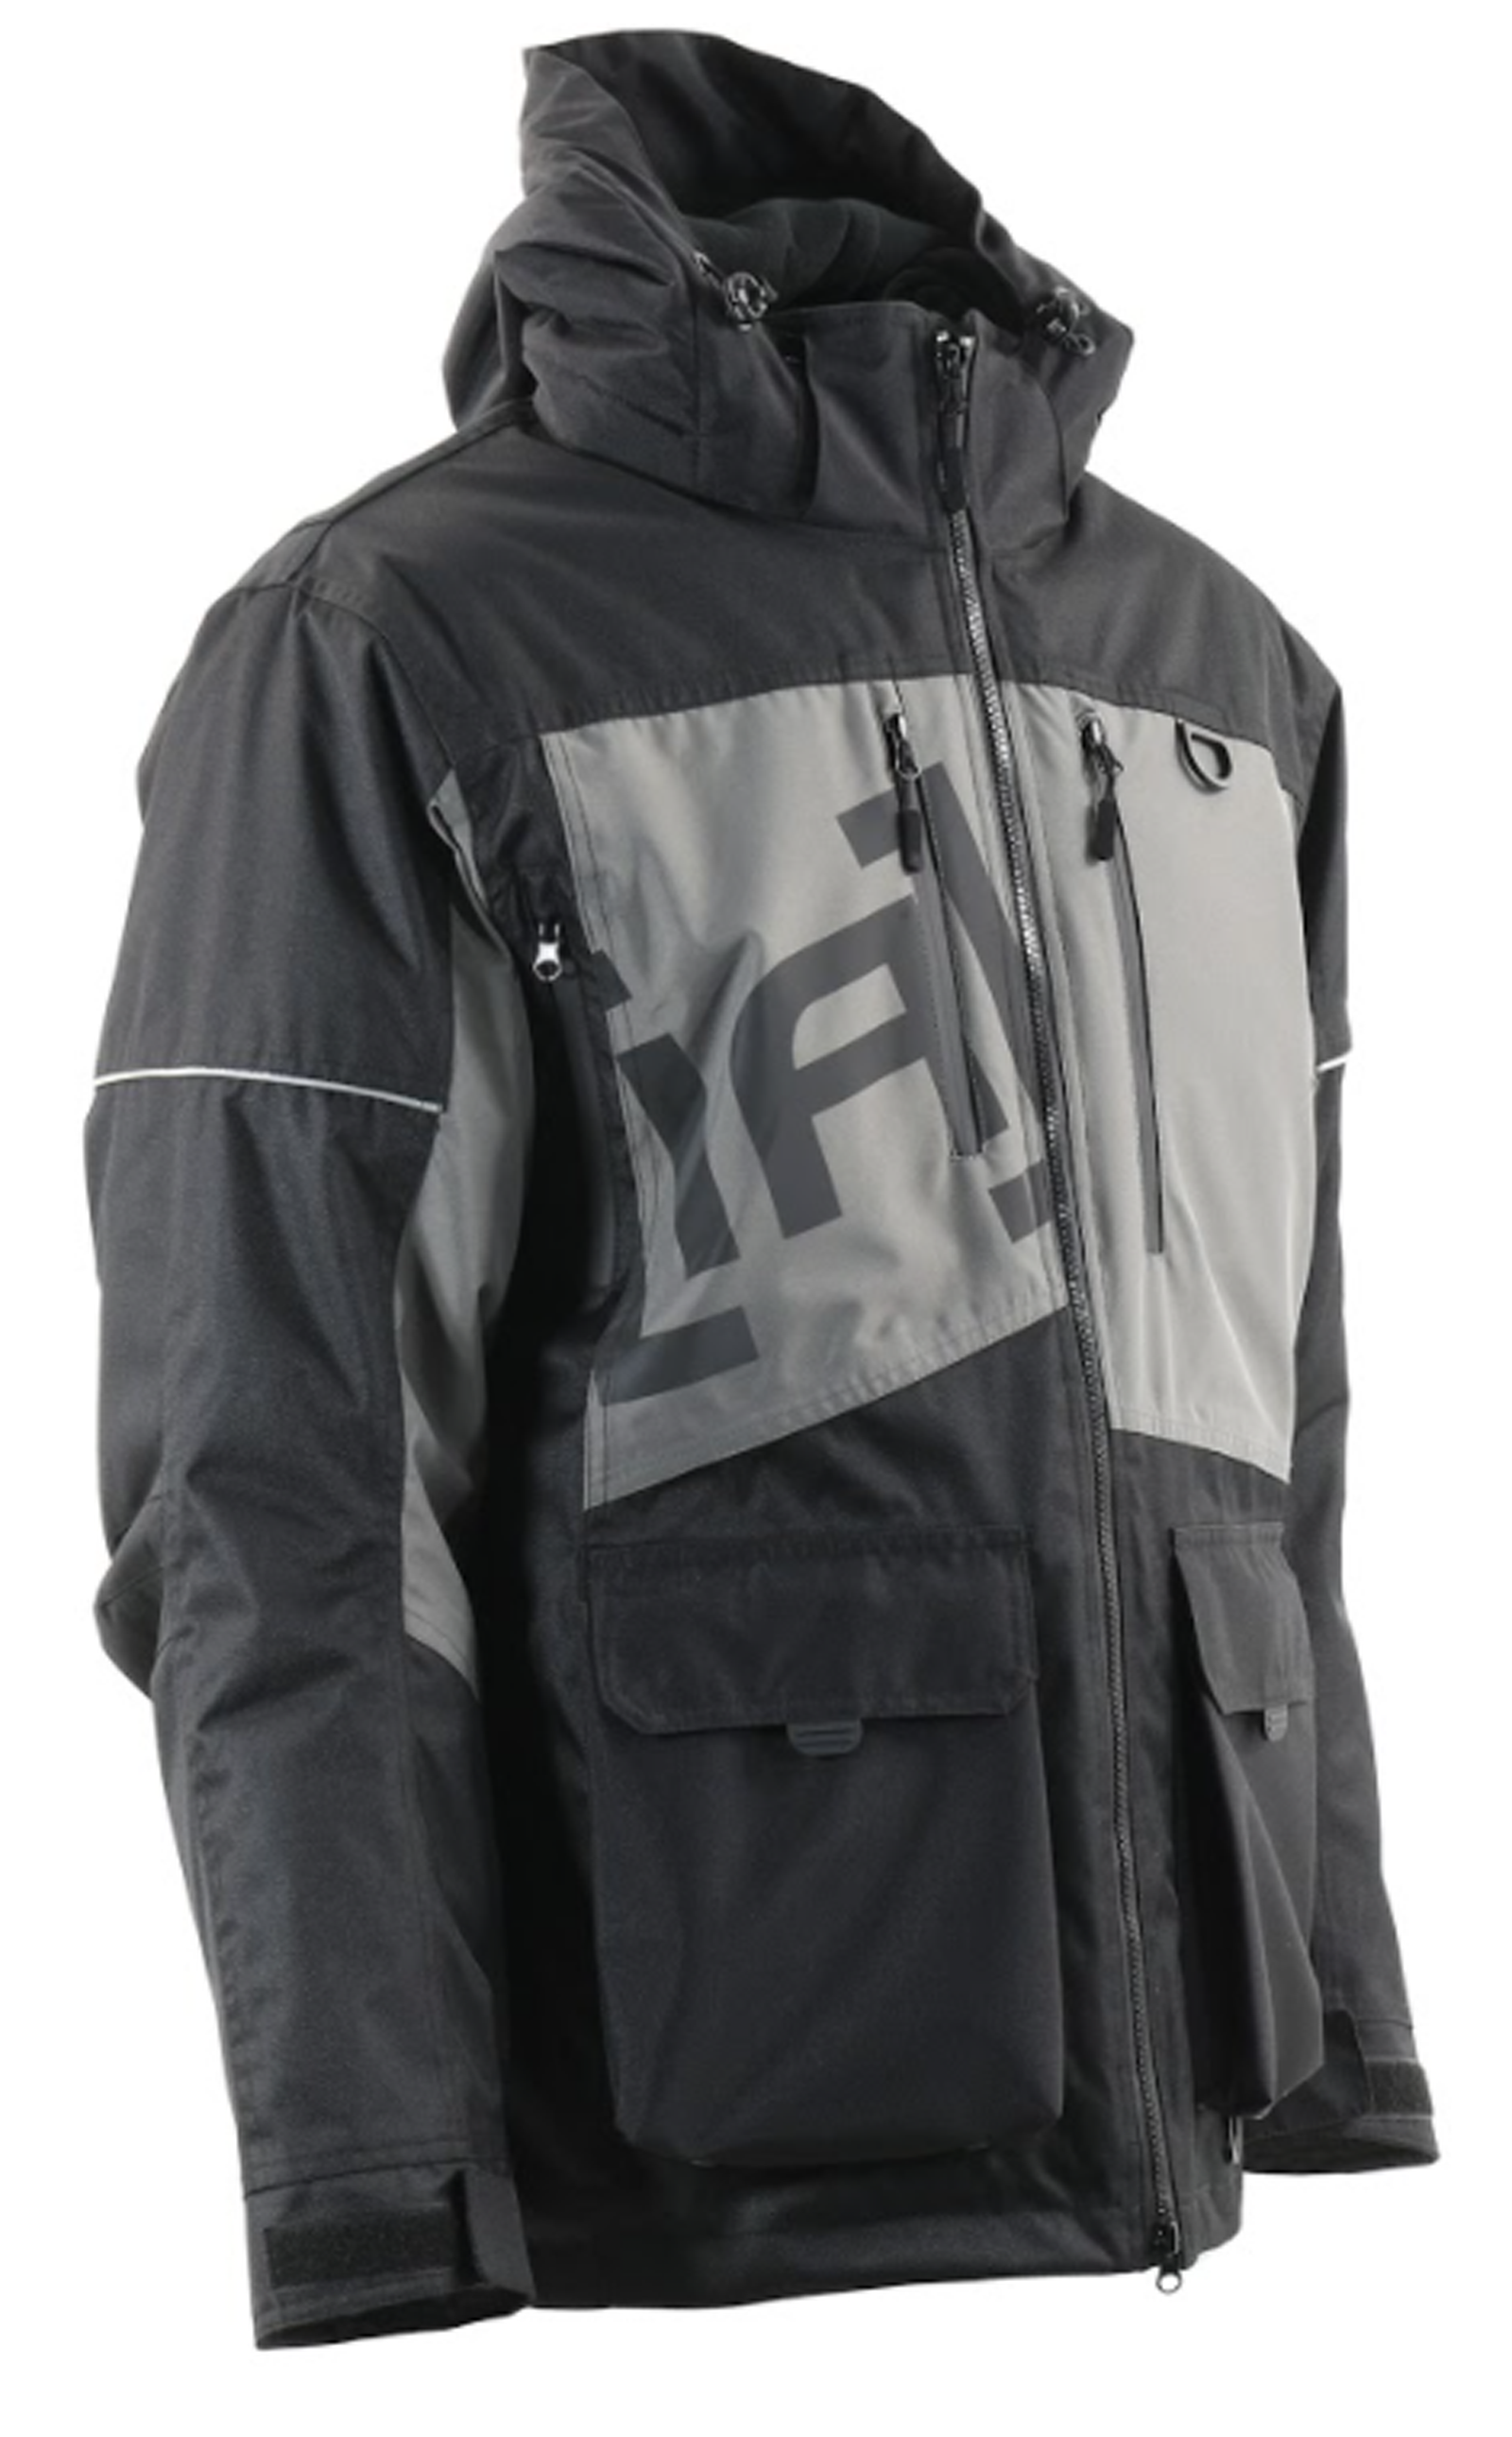 FXR Pro Fish - Need a NEW Floating Rain Suit